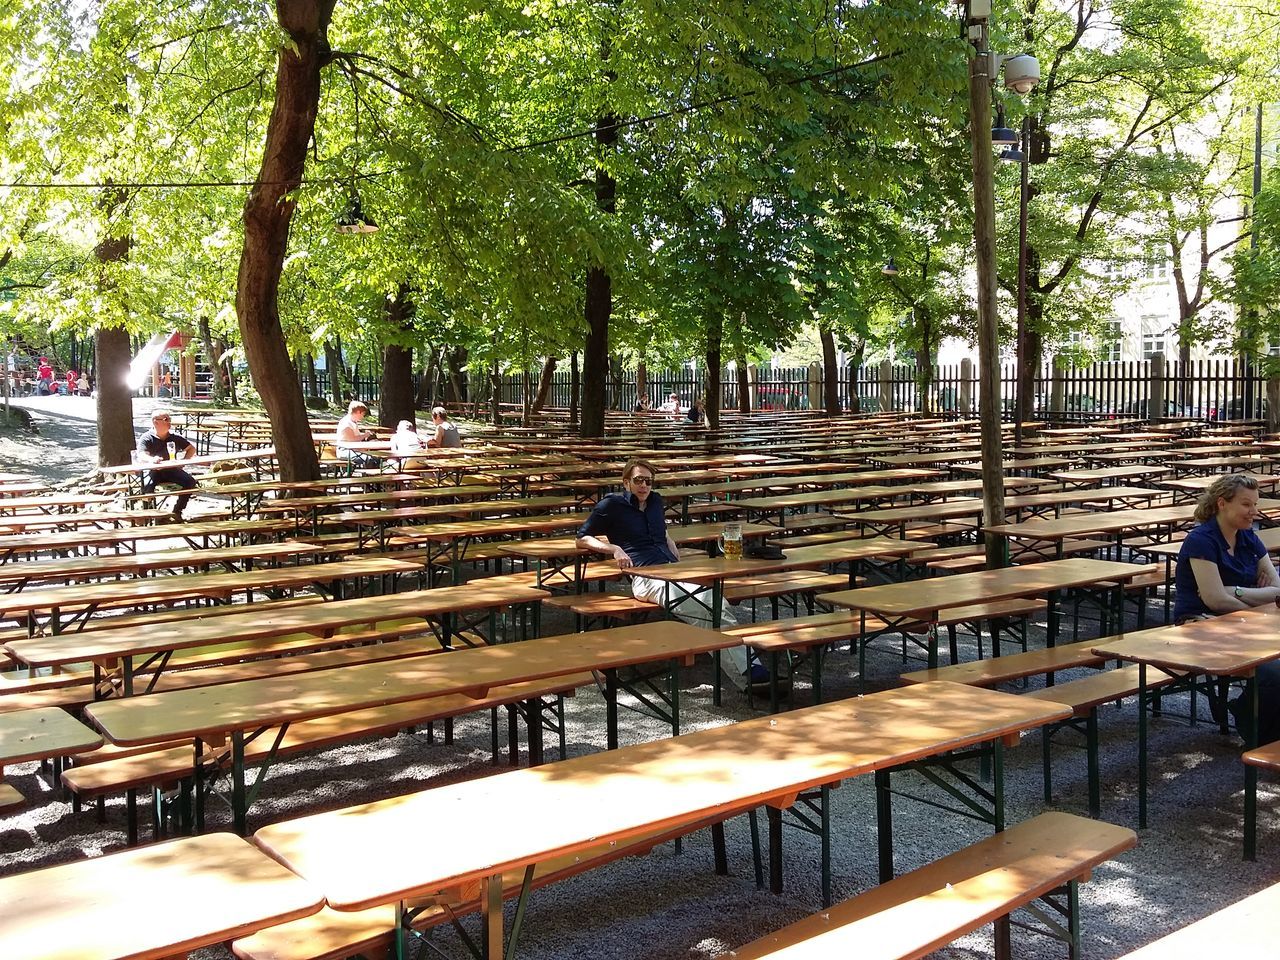 Waiting at the biergarten. · Munich München germany Augustiner August beer garden benches many benches Benches all around bench paradise summer Early Bird The Purist (no edit, no filter)